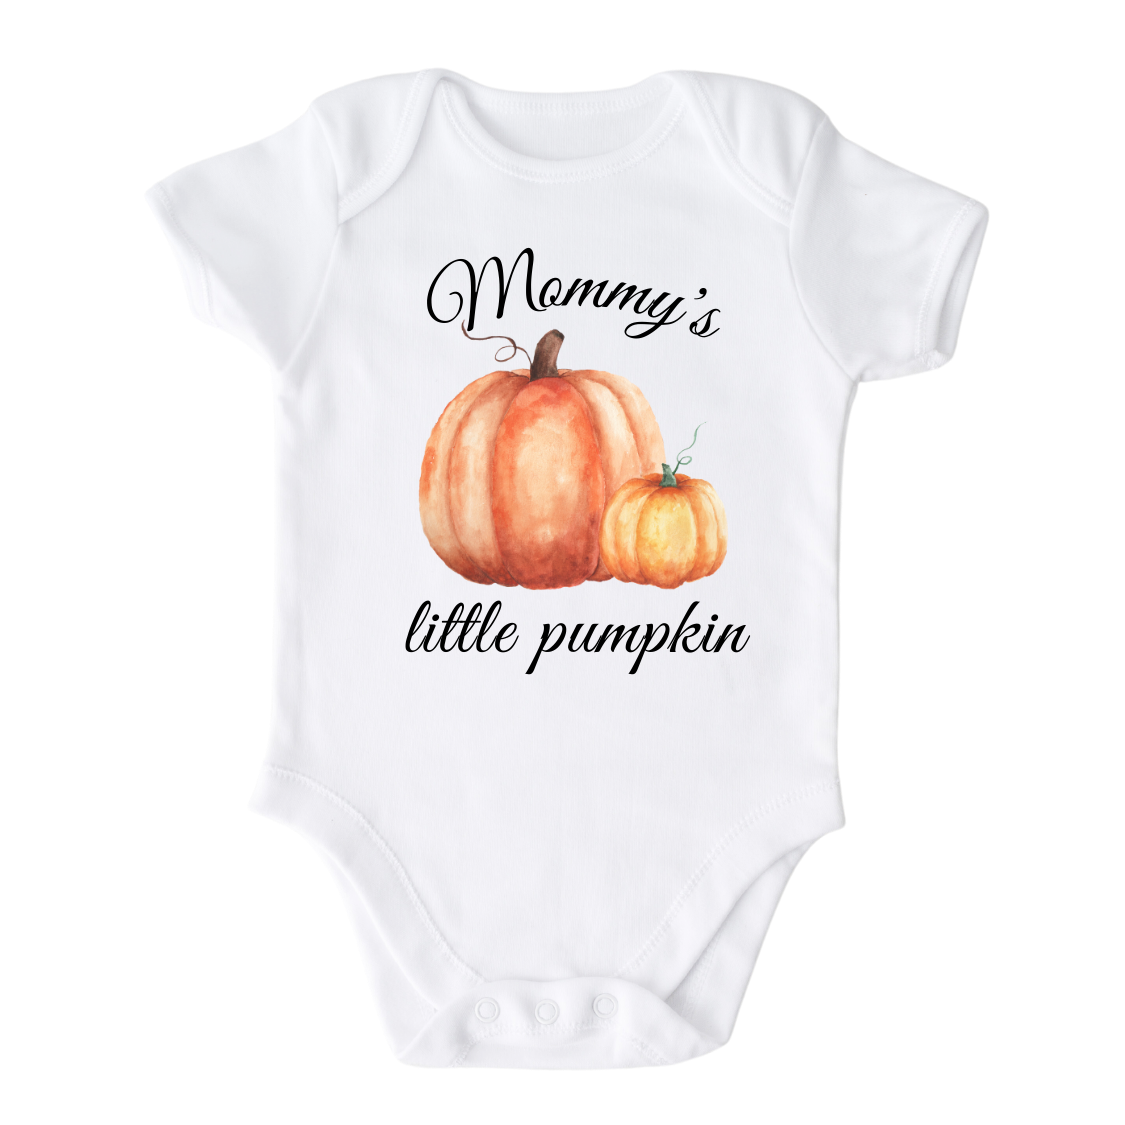 Fall Baby Onesie® Mommy's Little Pumpkin Shirt Baby Clothes Unisex Baby Announcement Gift for Newborn Outfit